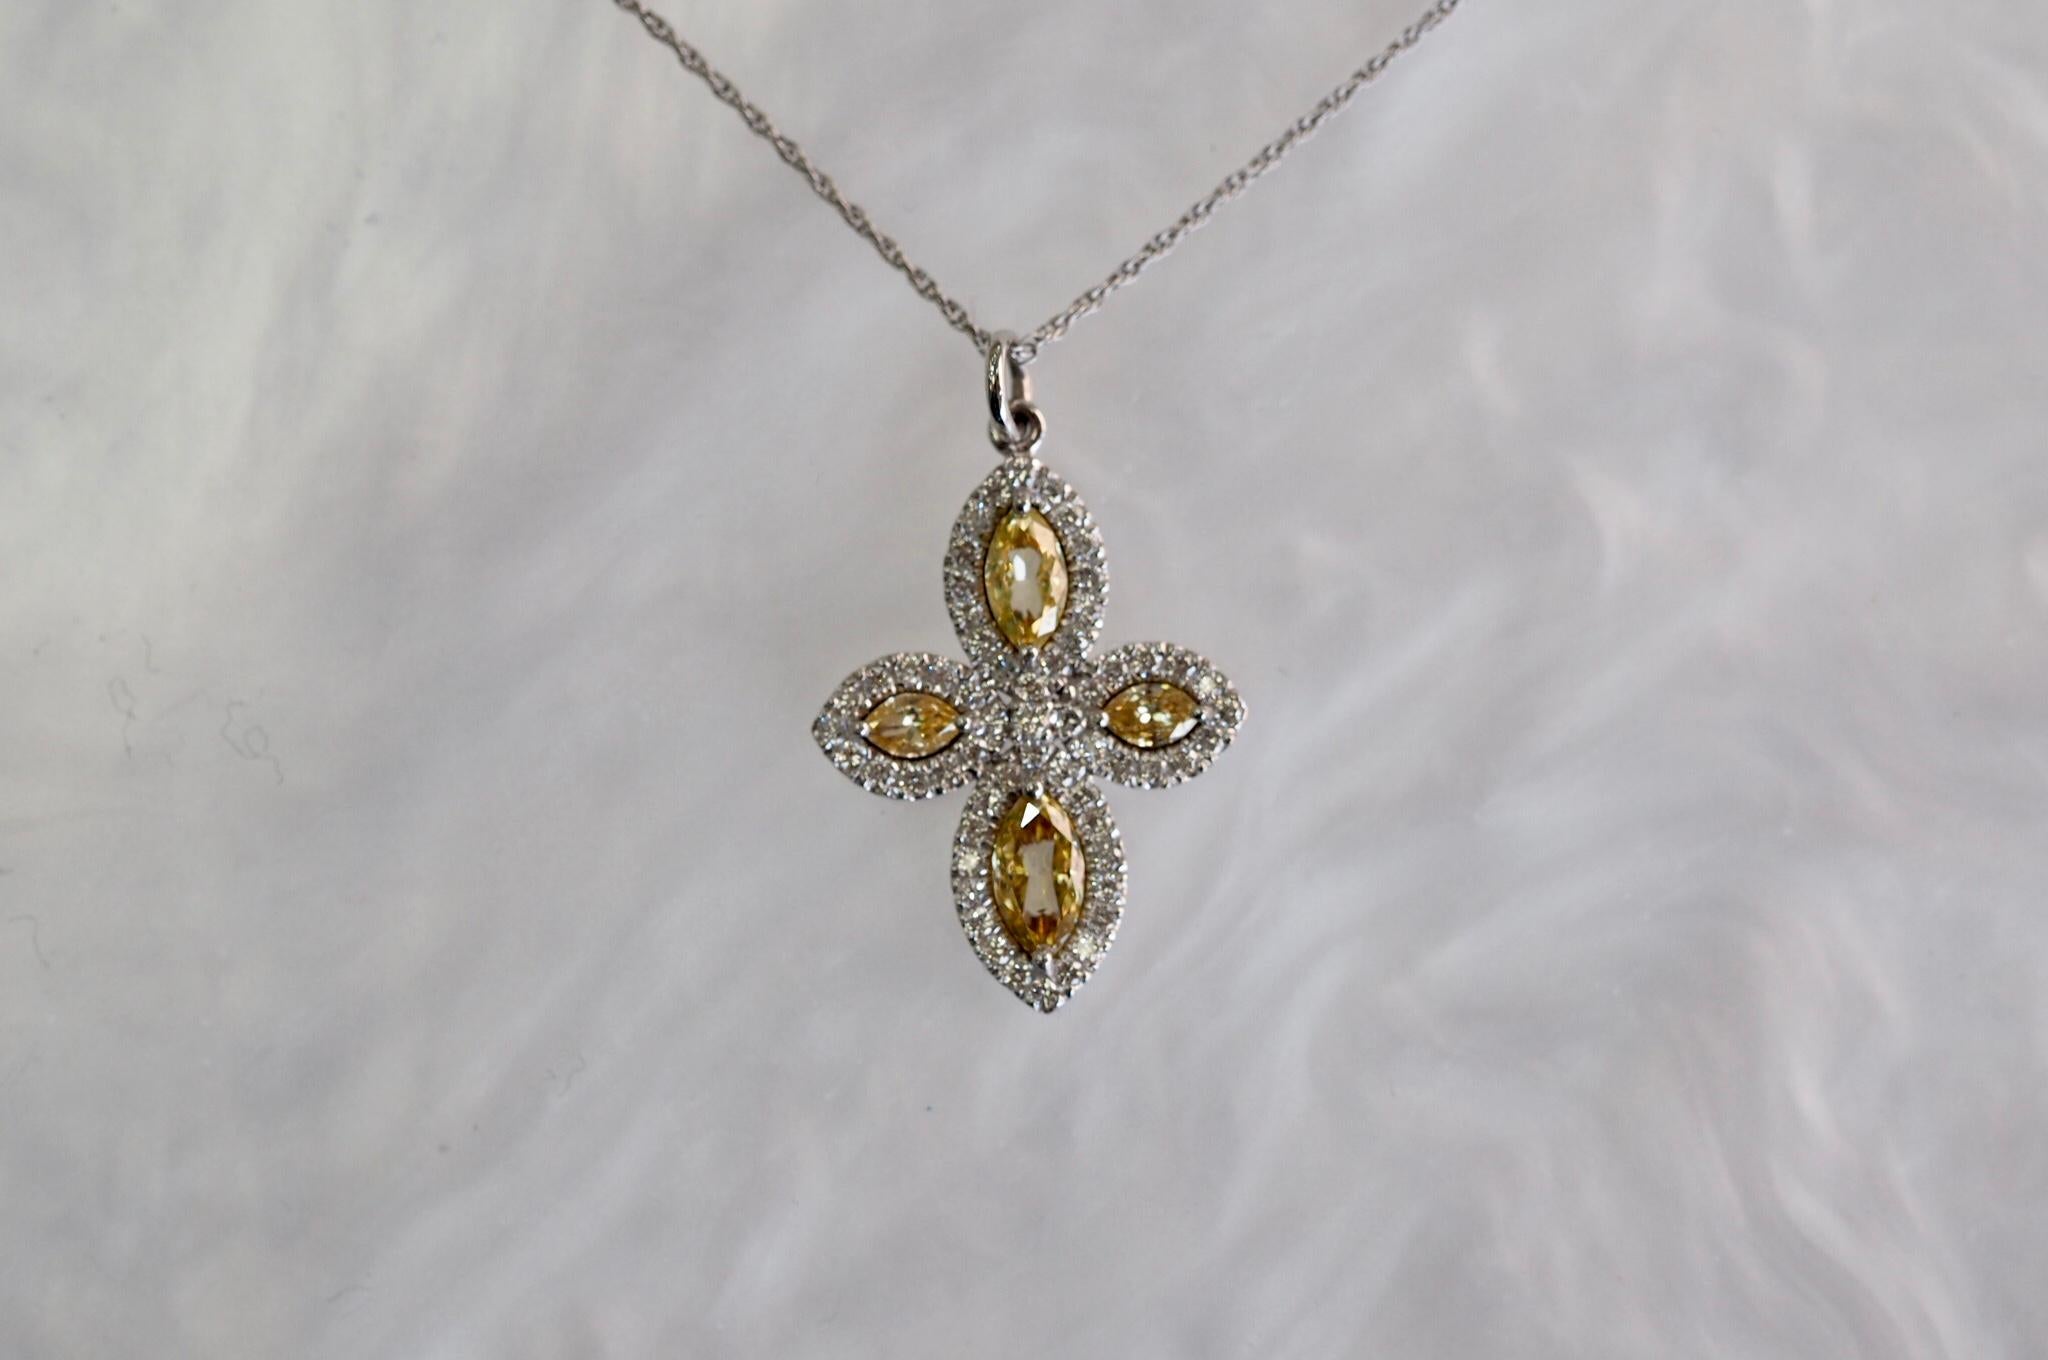 This Diamond Cross Necklace includes four yellow marquise shape diamonds weighing 0.55 carats and 0.37 carats of white round brilliant cut diamonds. It is 0.92 carat total weight in diamonds. It is set in 14 karat white gold including the 16'' cable